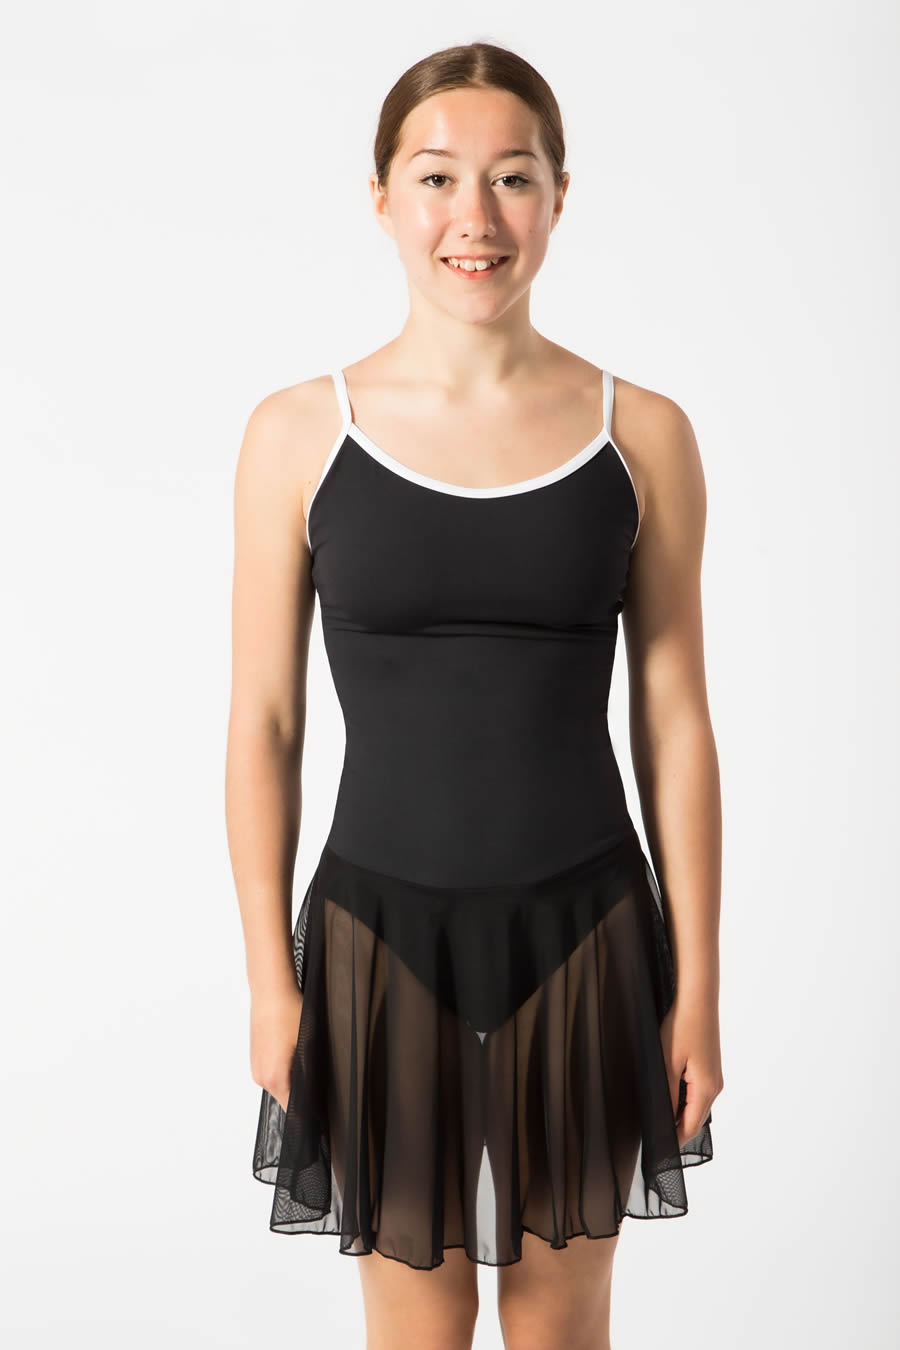 Browse Camisole Skirted Leotard